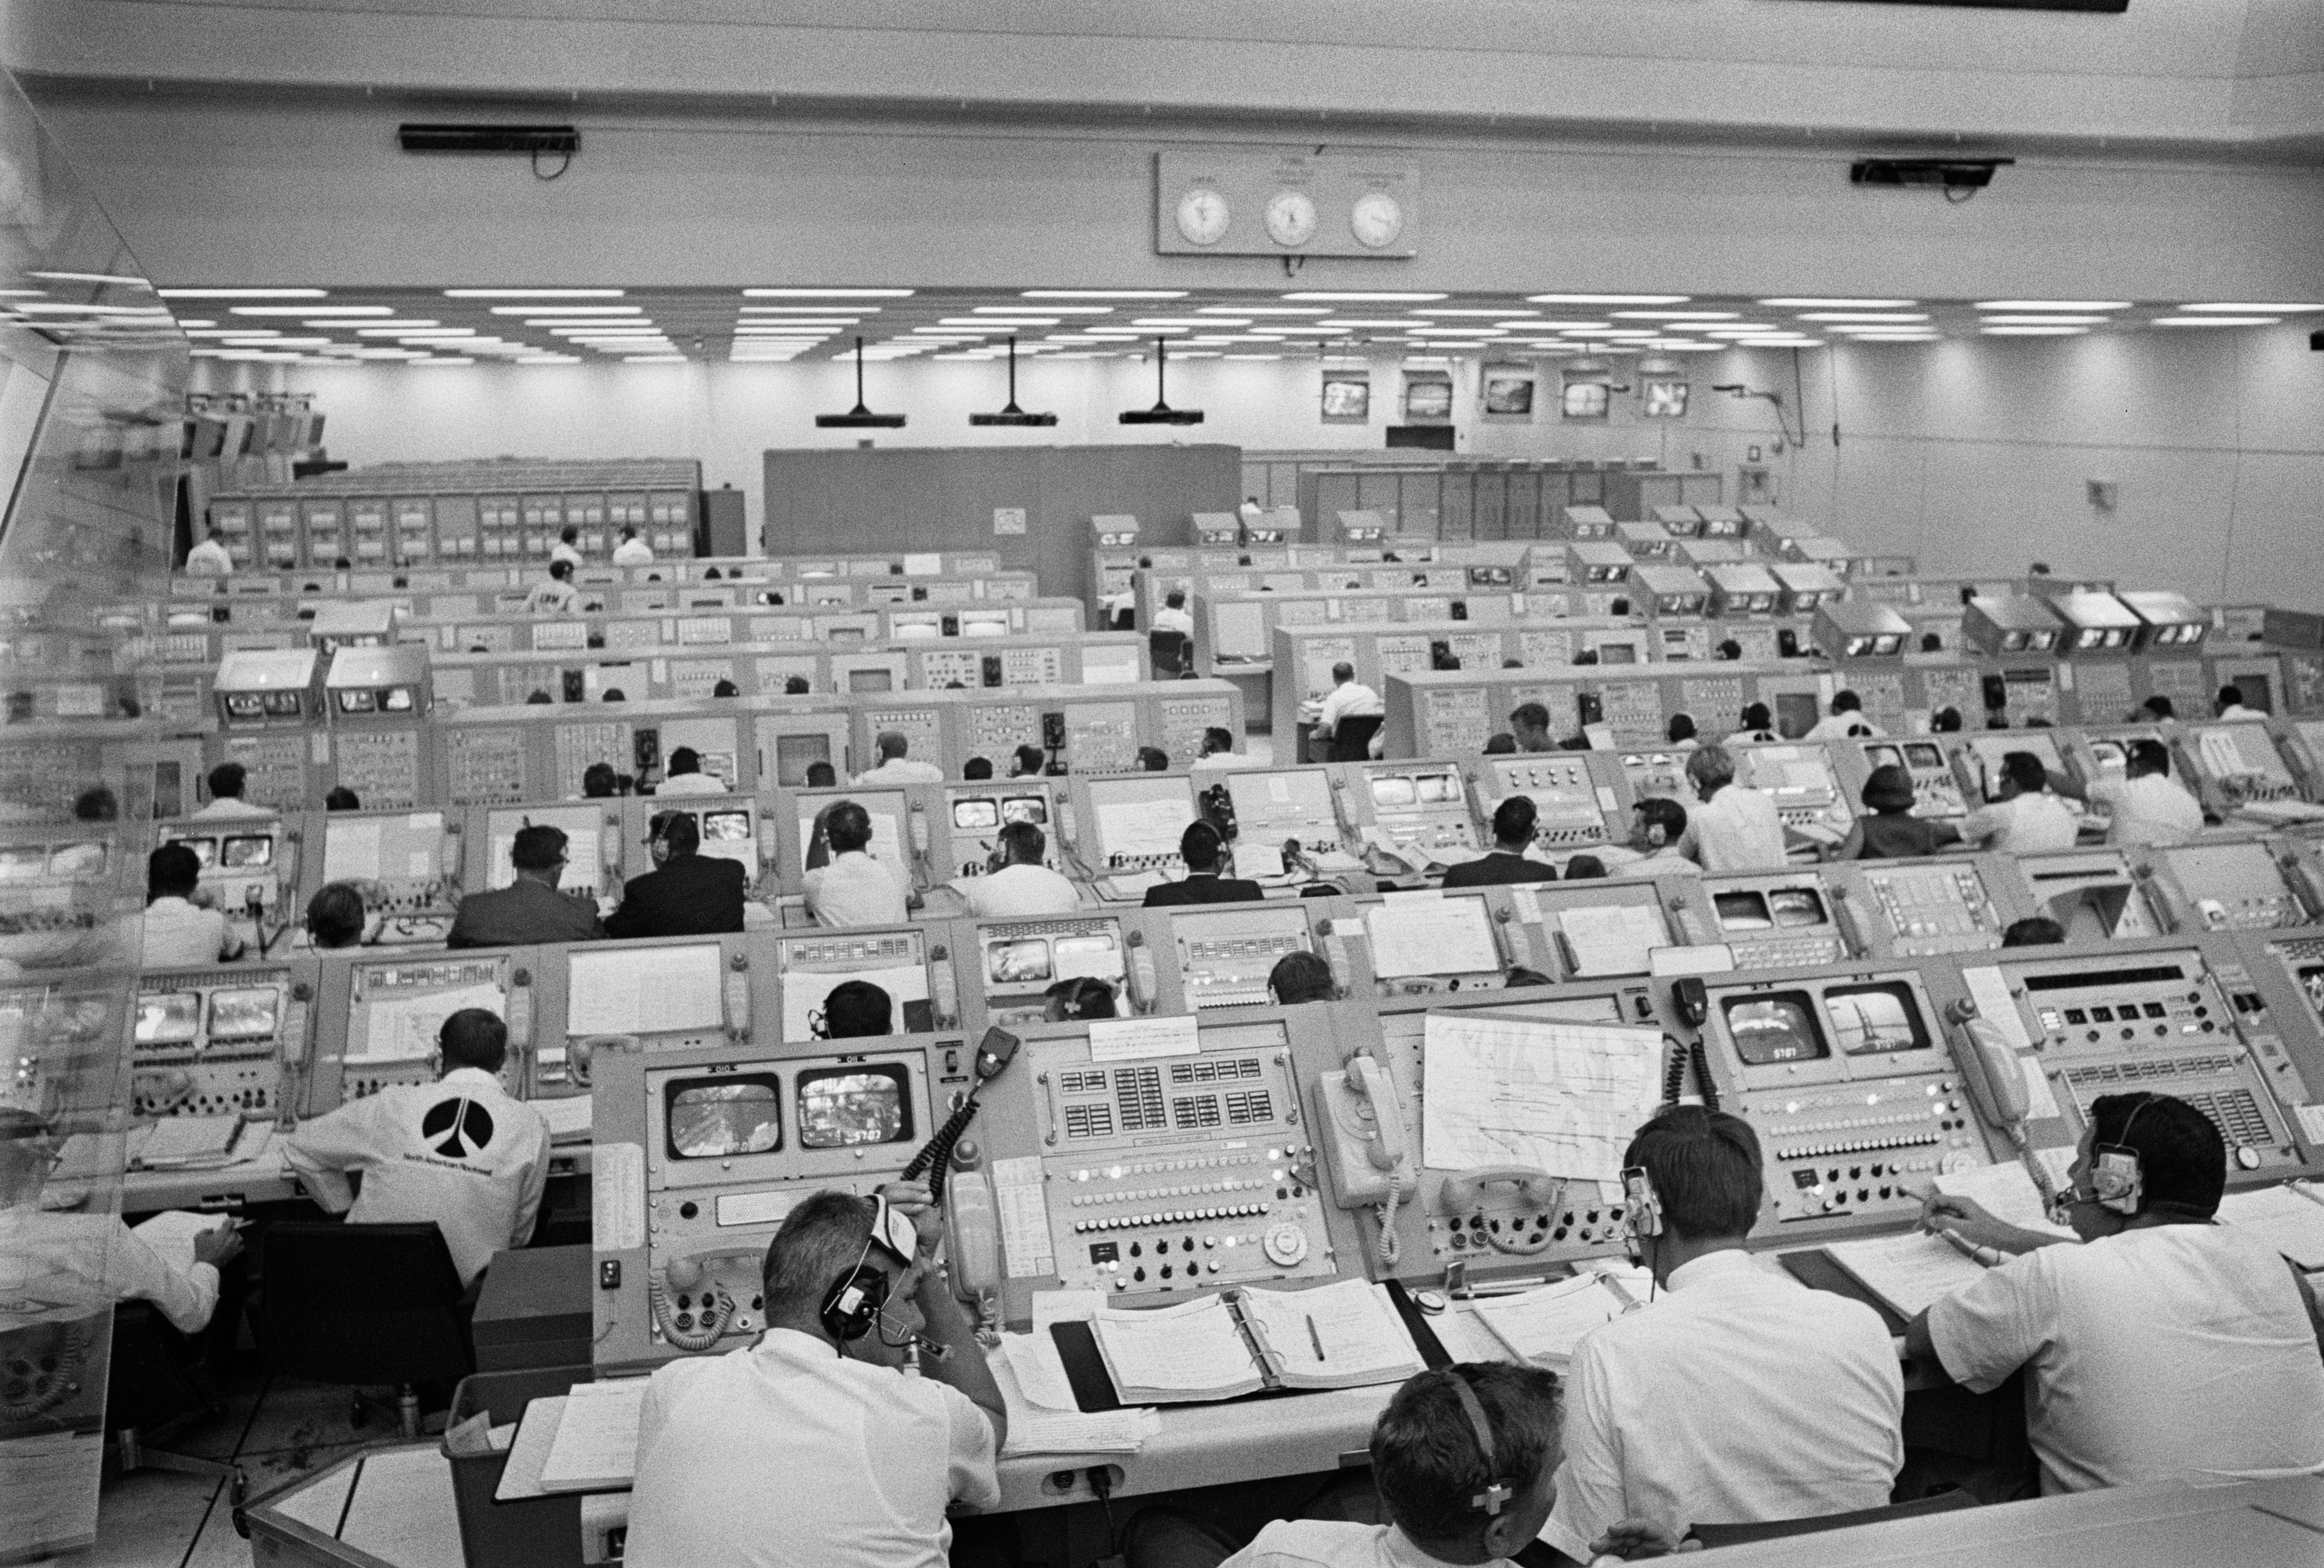 The team of controllers in Firing Room 1 monitor the Apollo 11 CDDT